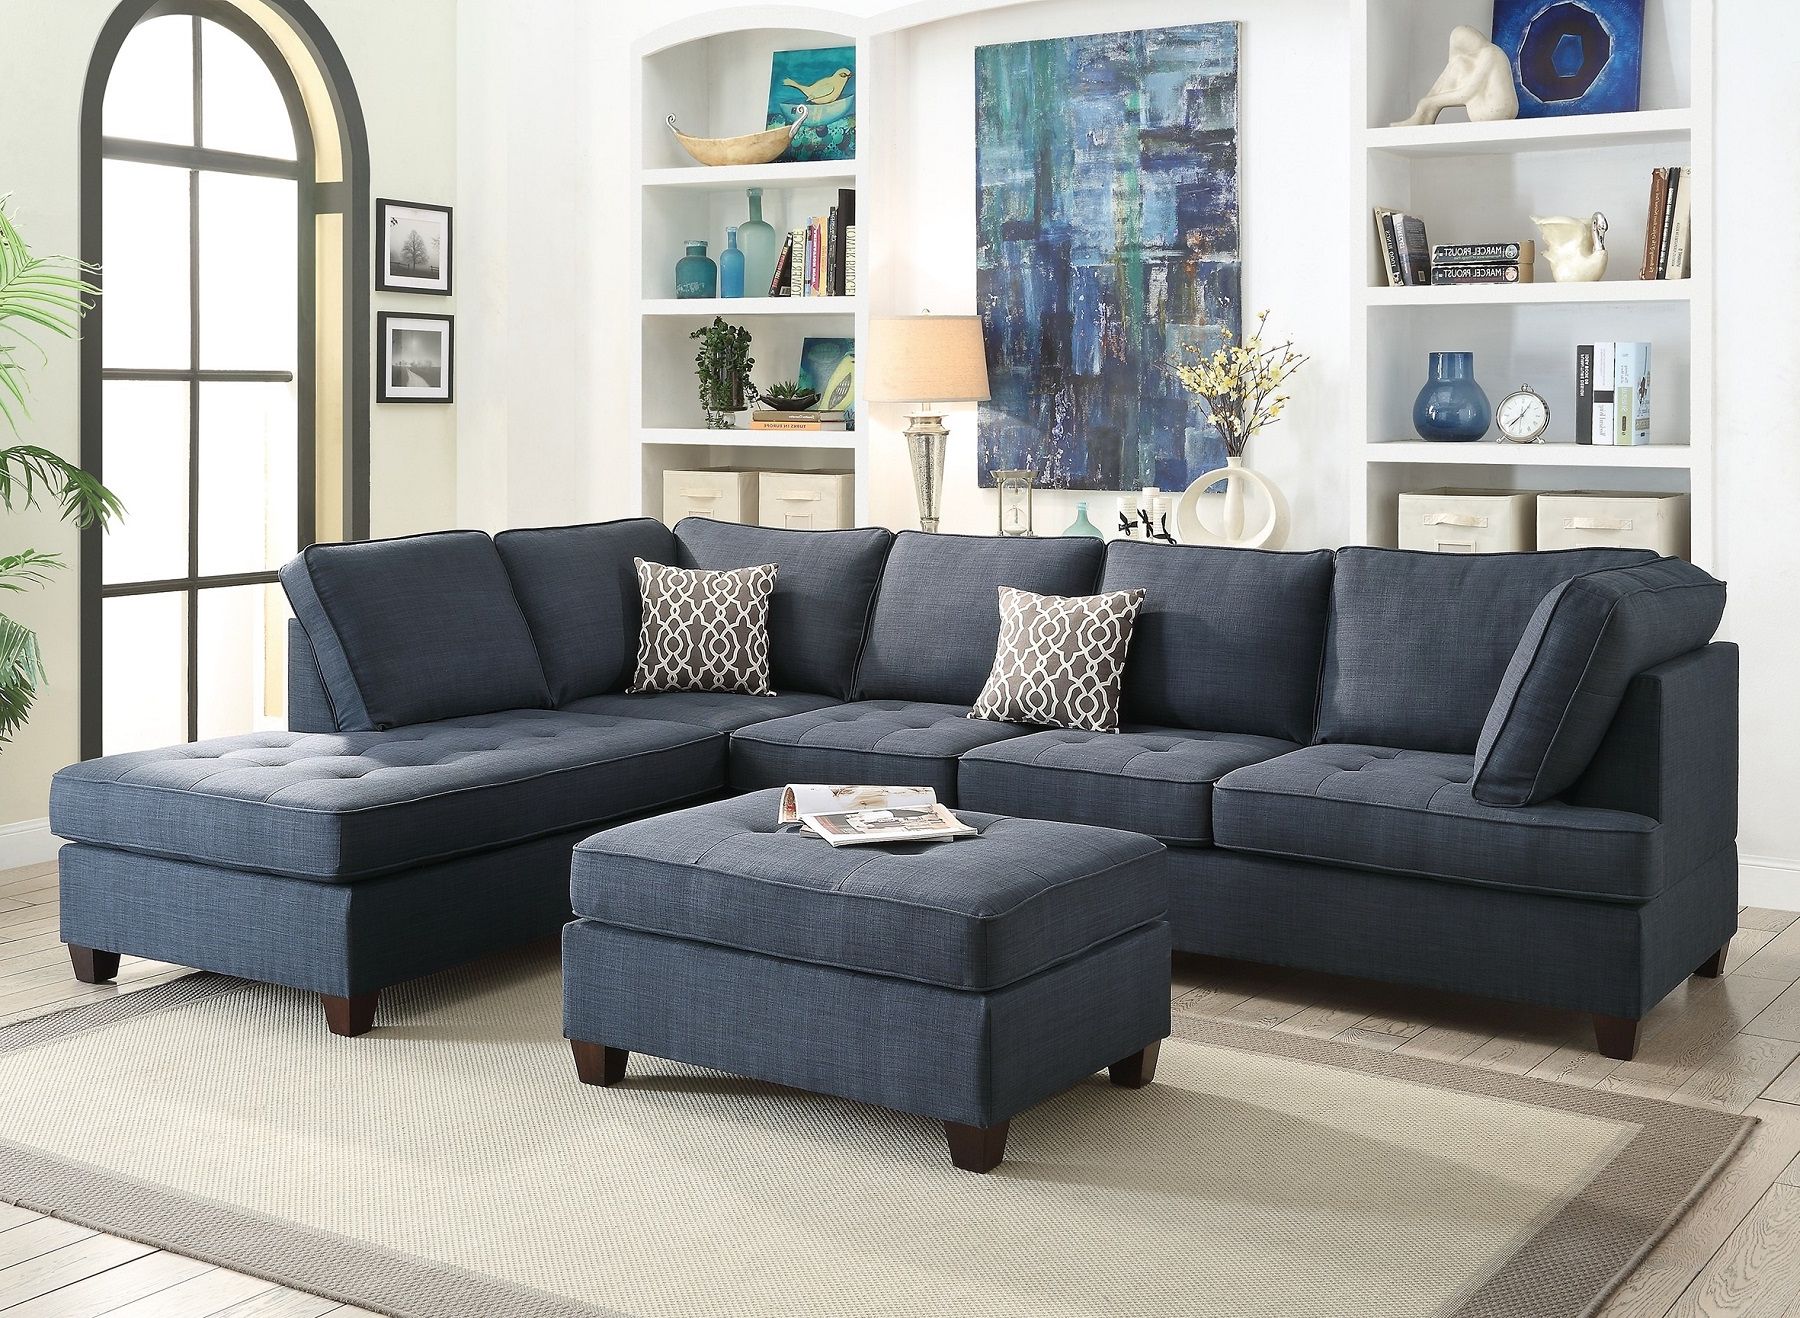 Dark Blue Dorris Fabric Smooth Textured Sectional Sofa Chaise 2pcs Set In Most Recently Released Blue Fabric Lounge Chair And Ottomans Set (View 5 of 10)